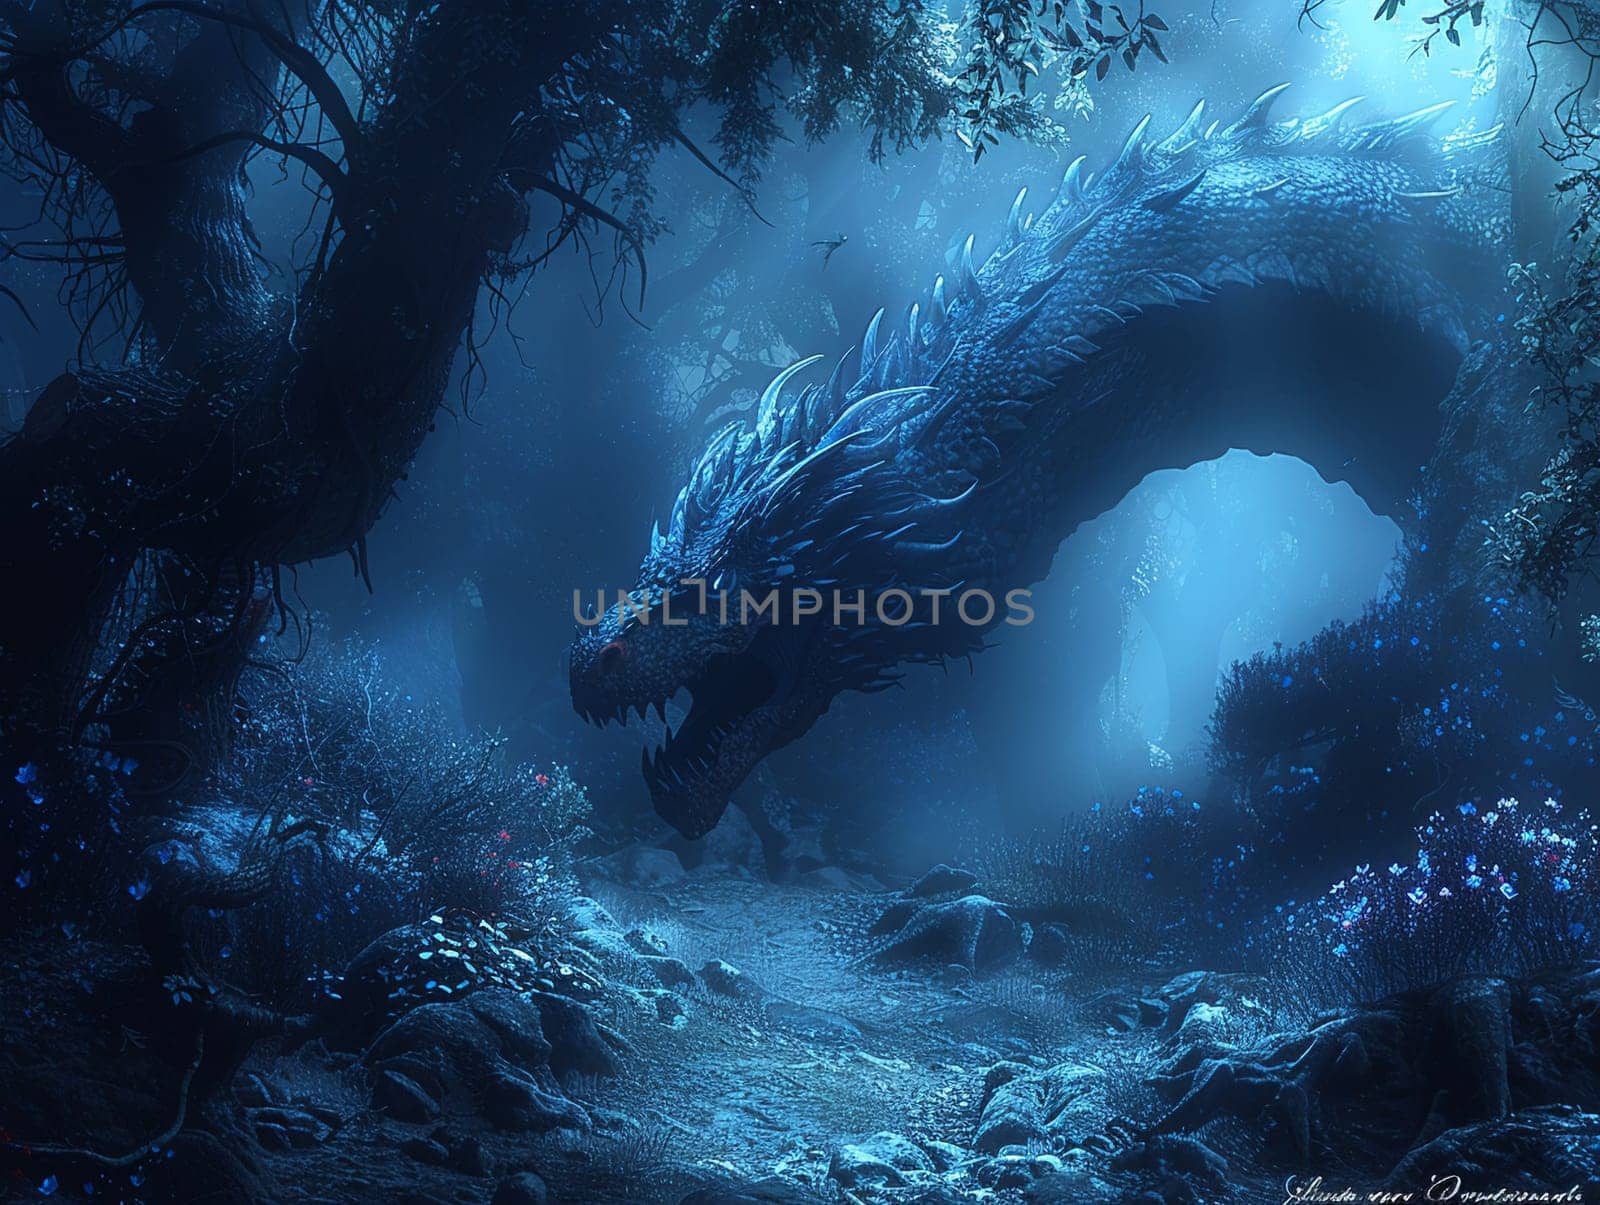 Dragon's lair hidden in a mystical forest, beautifully rendered in digital art with atmospheric lighting.